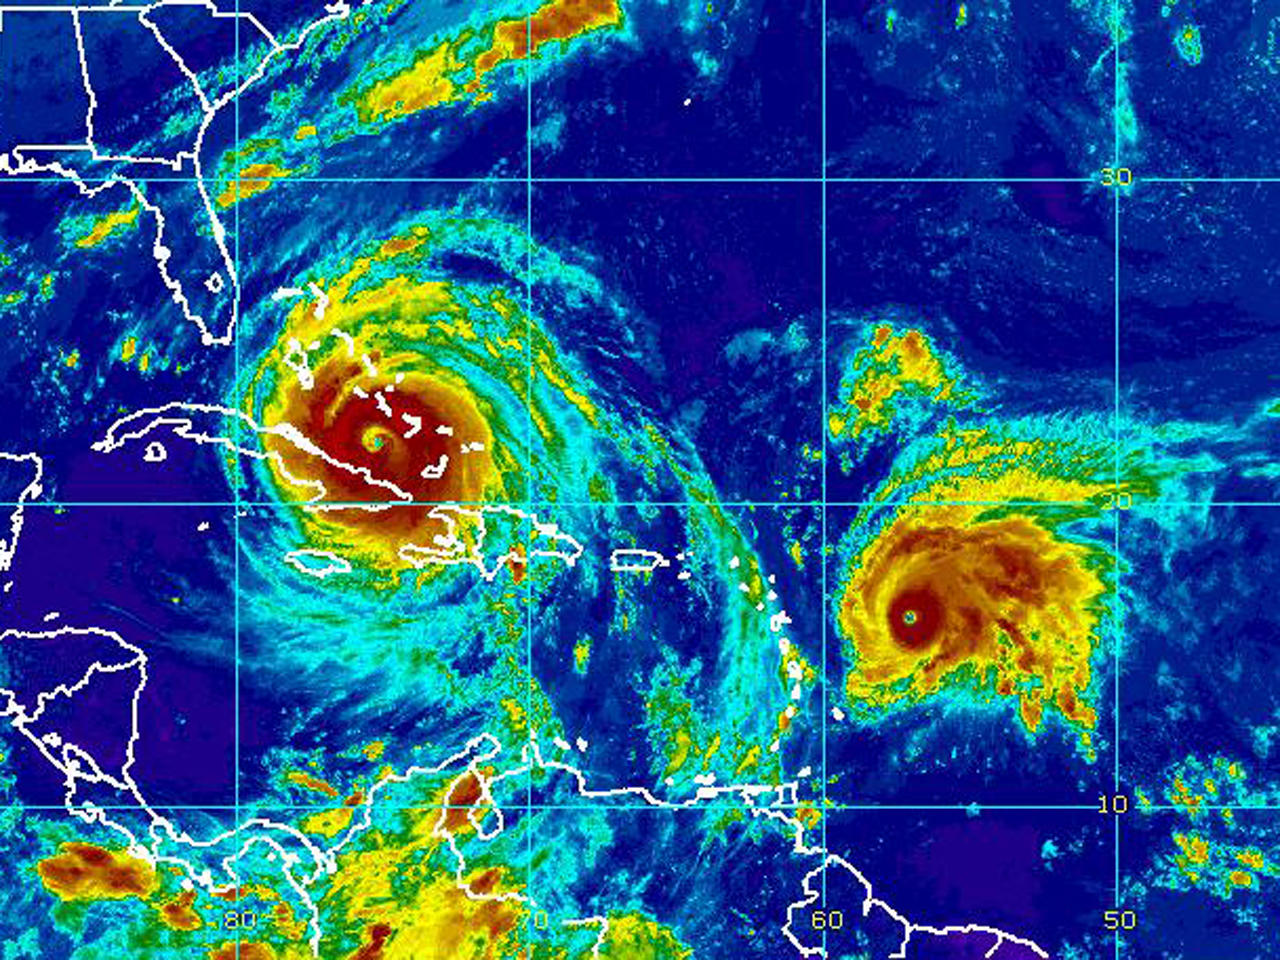 Hurricane Jose strengthens to "extremely dangerous" Category 4 storm